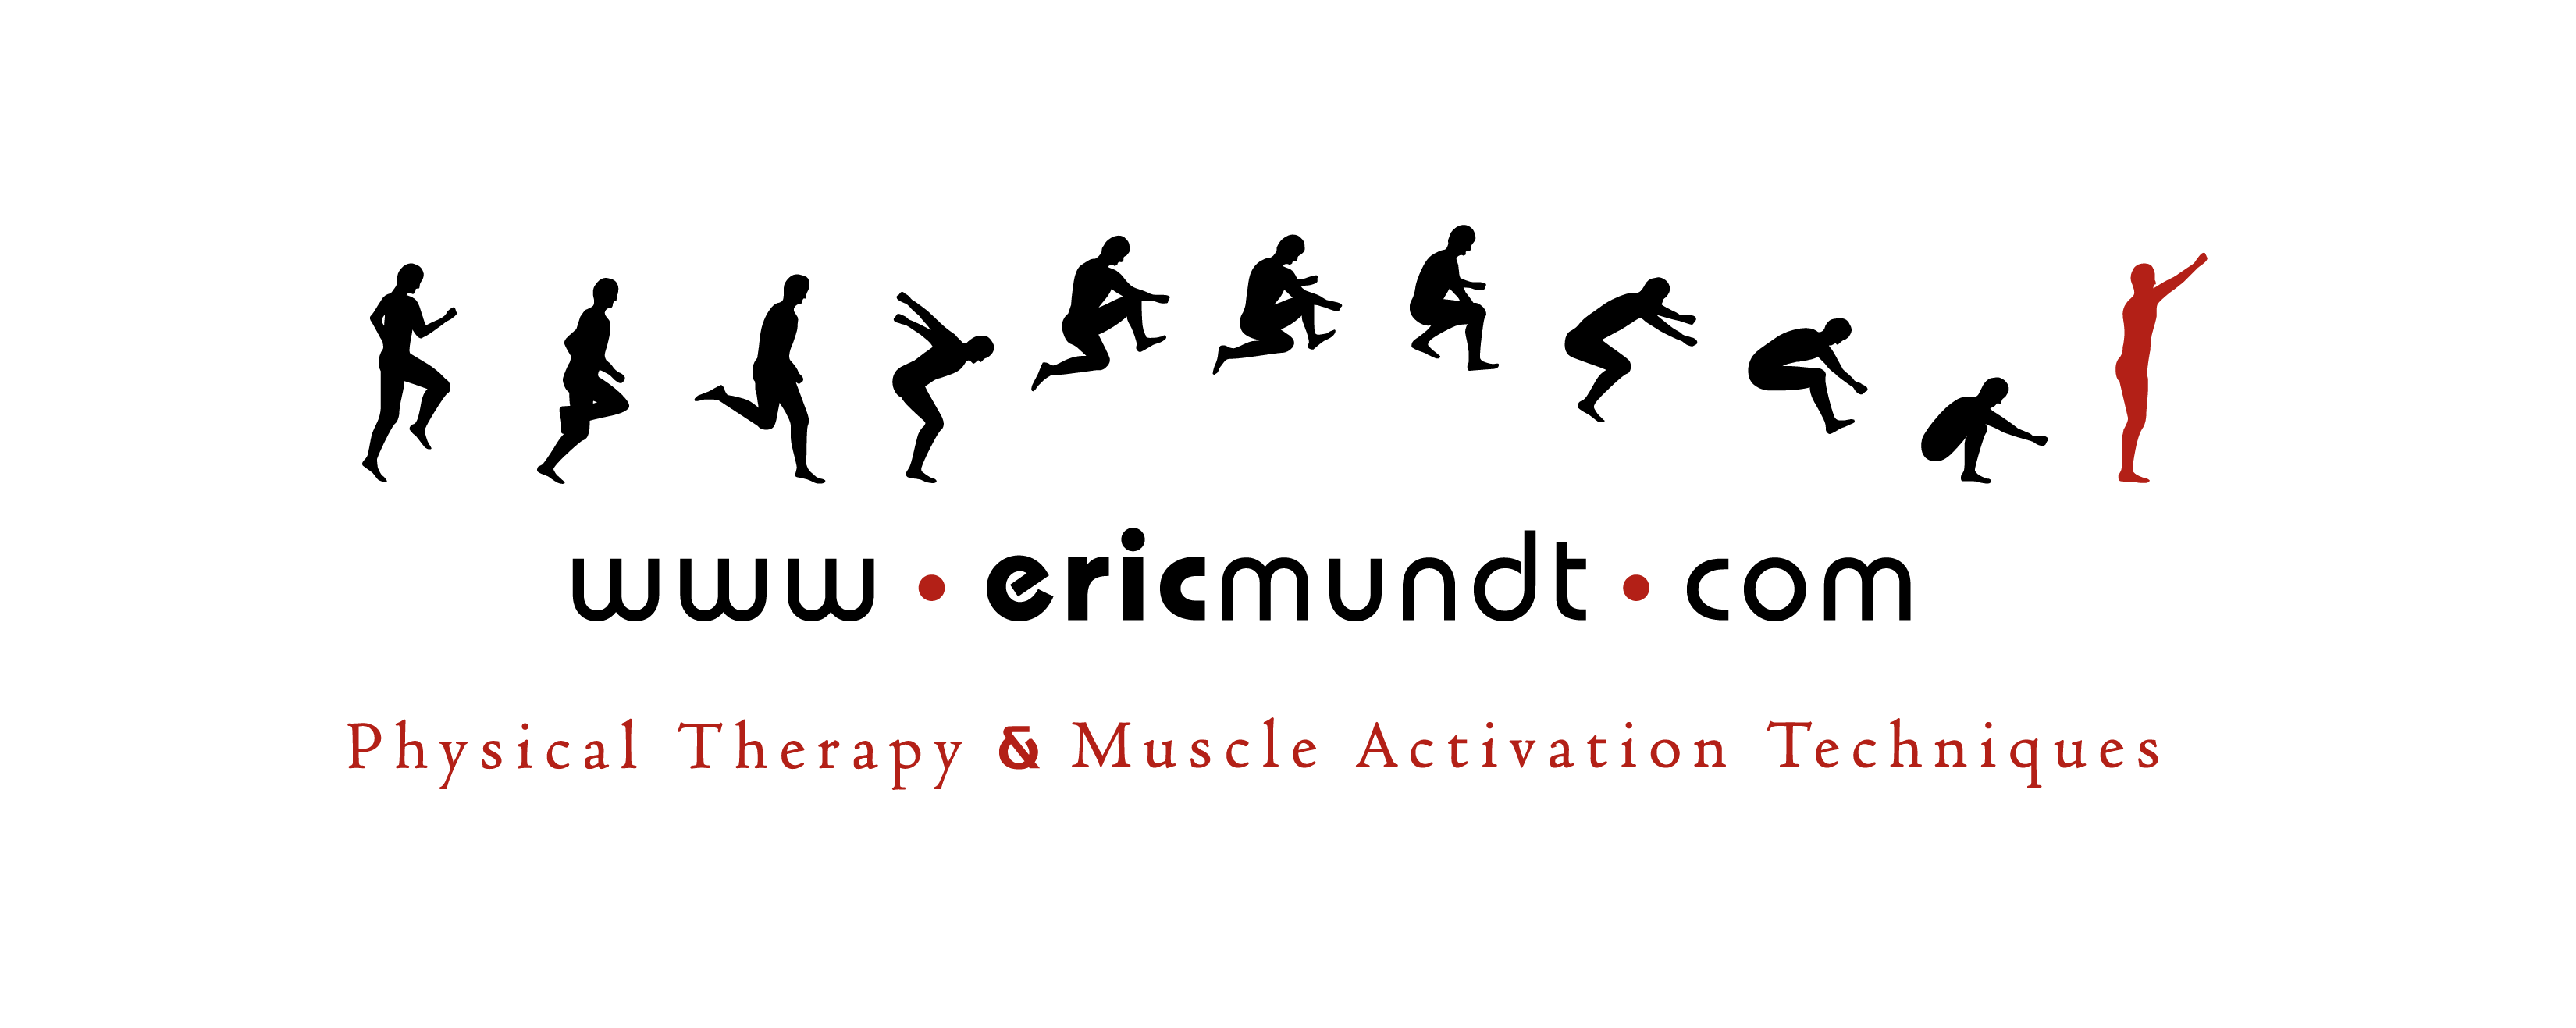 Eric Mundt Physical Therapy